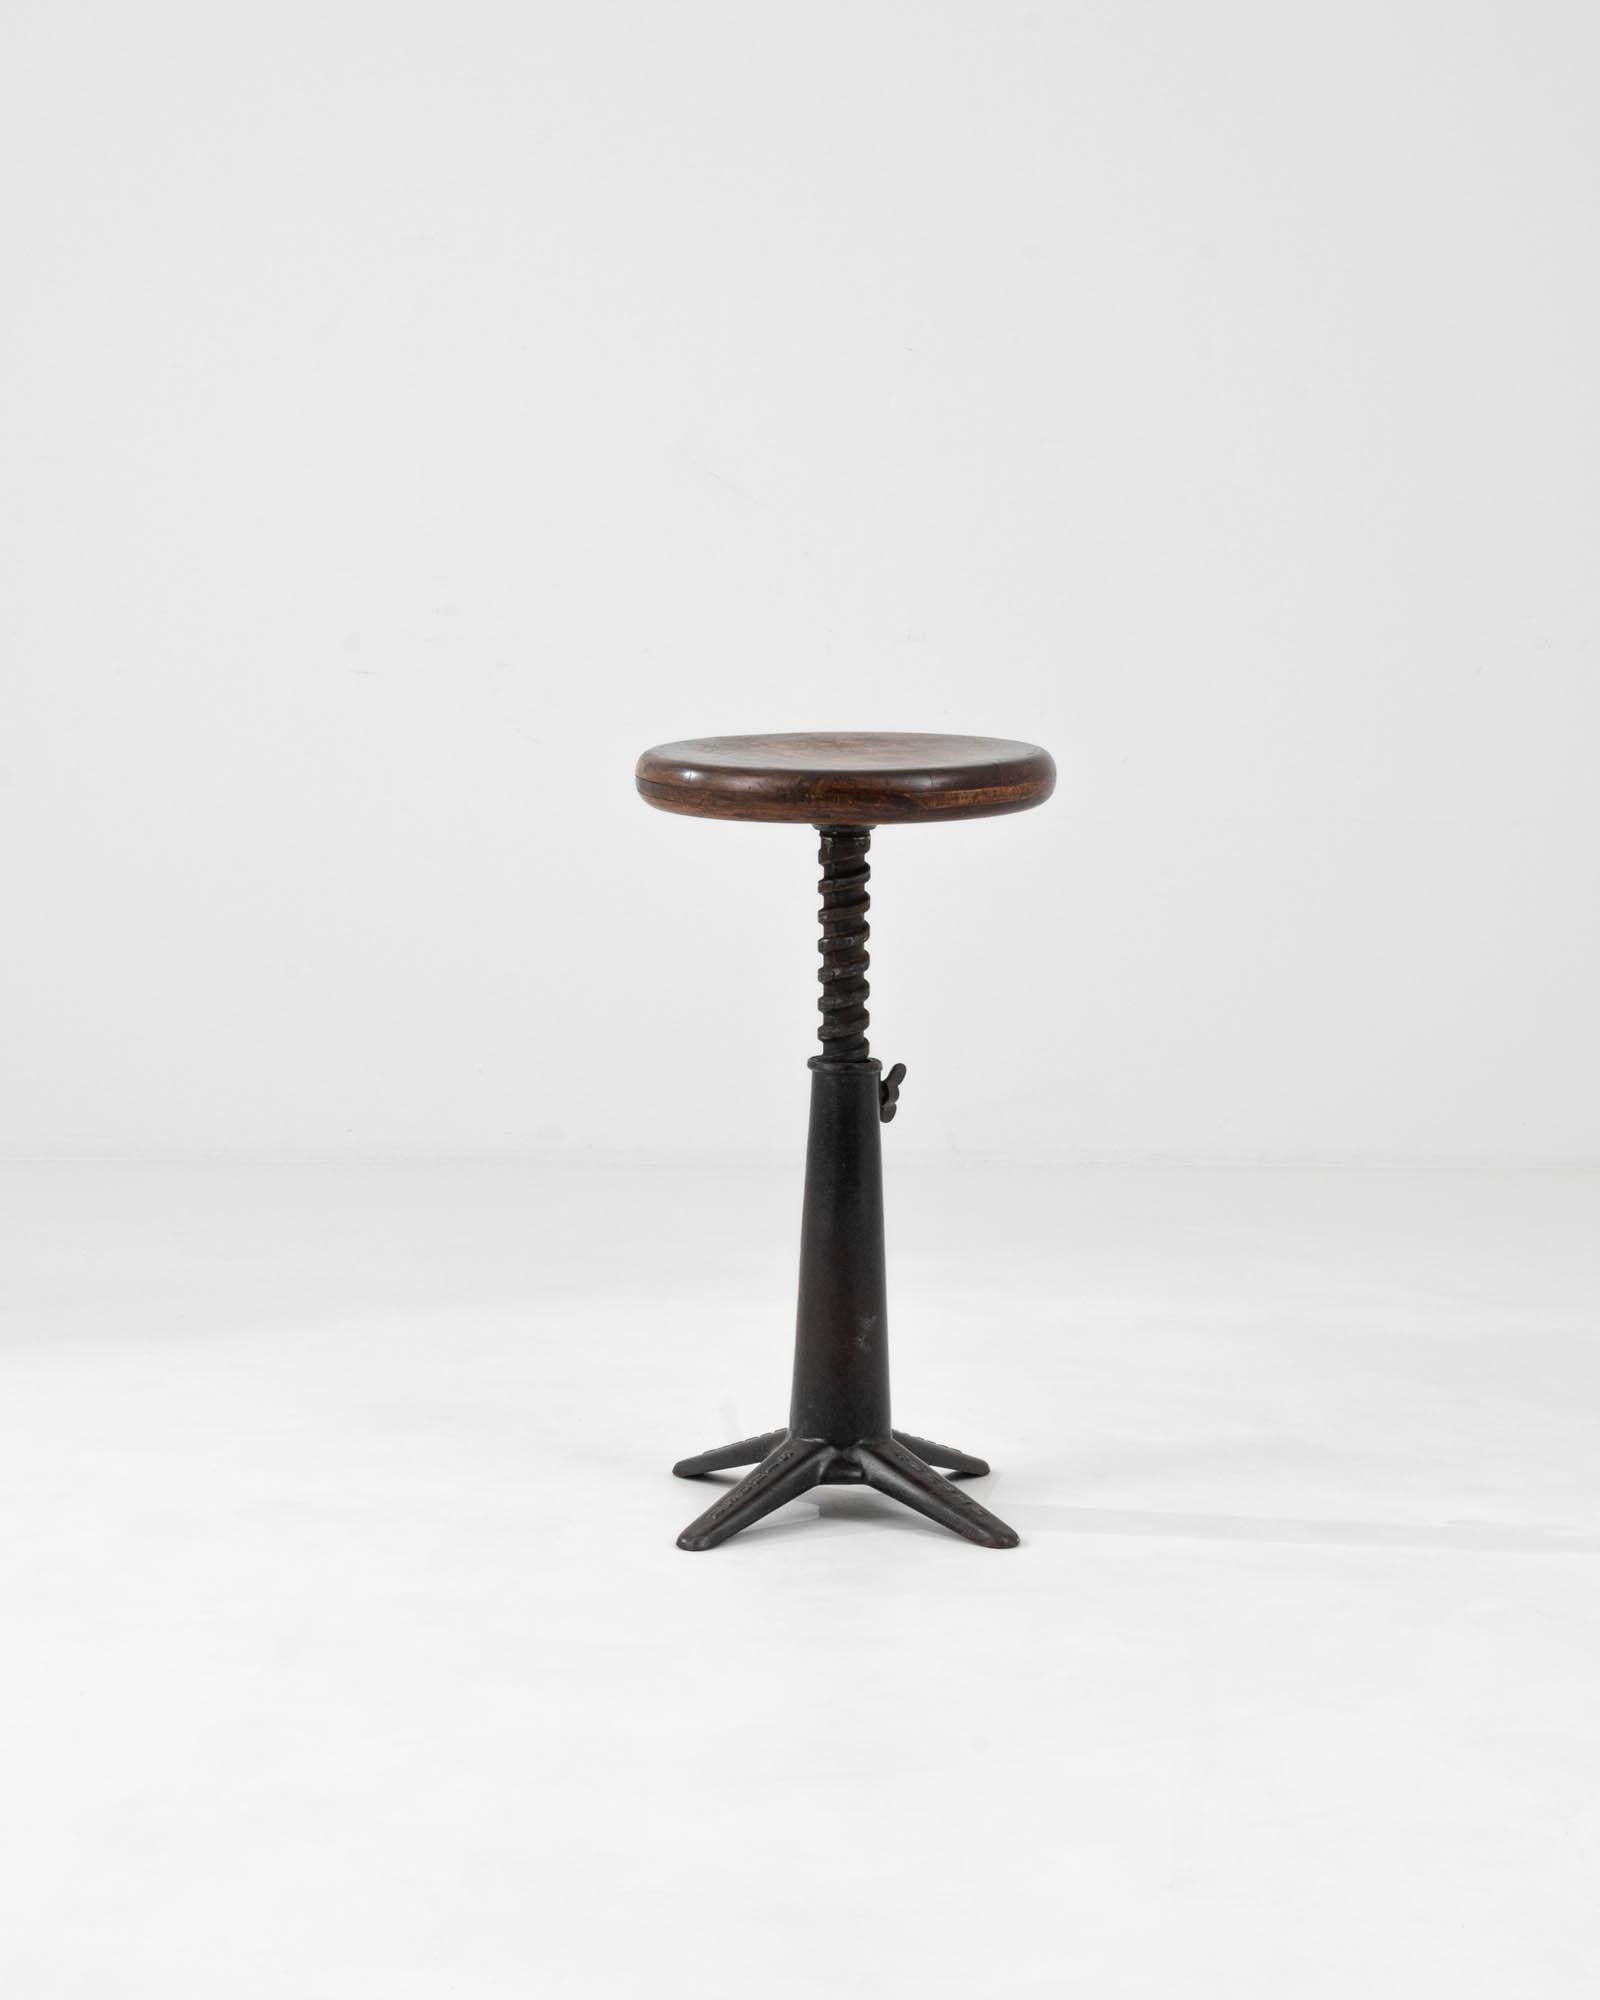 20th Century French Metal Swivel Stool With Wooden Seat 2